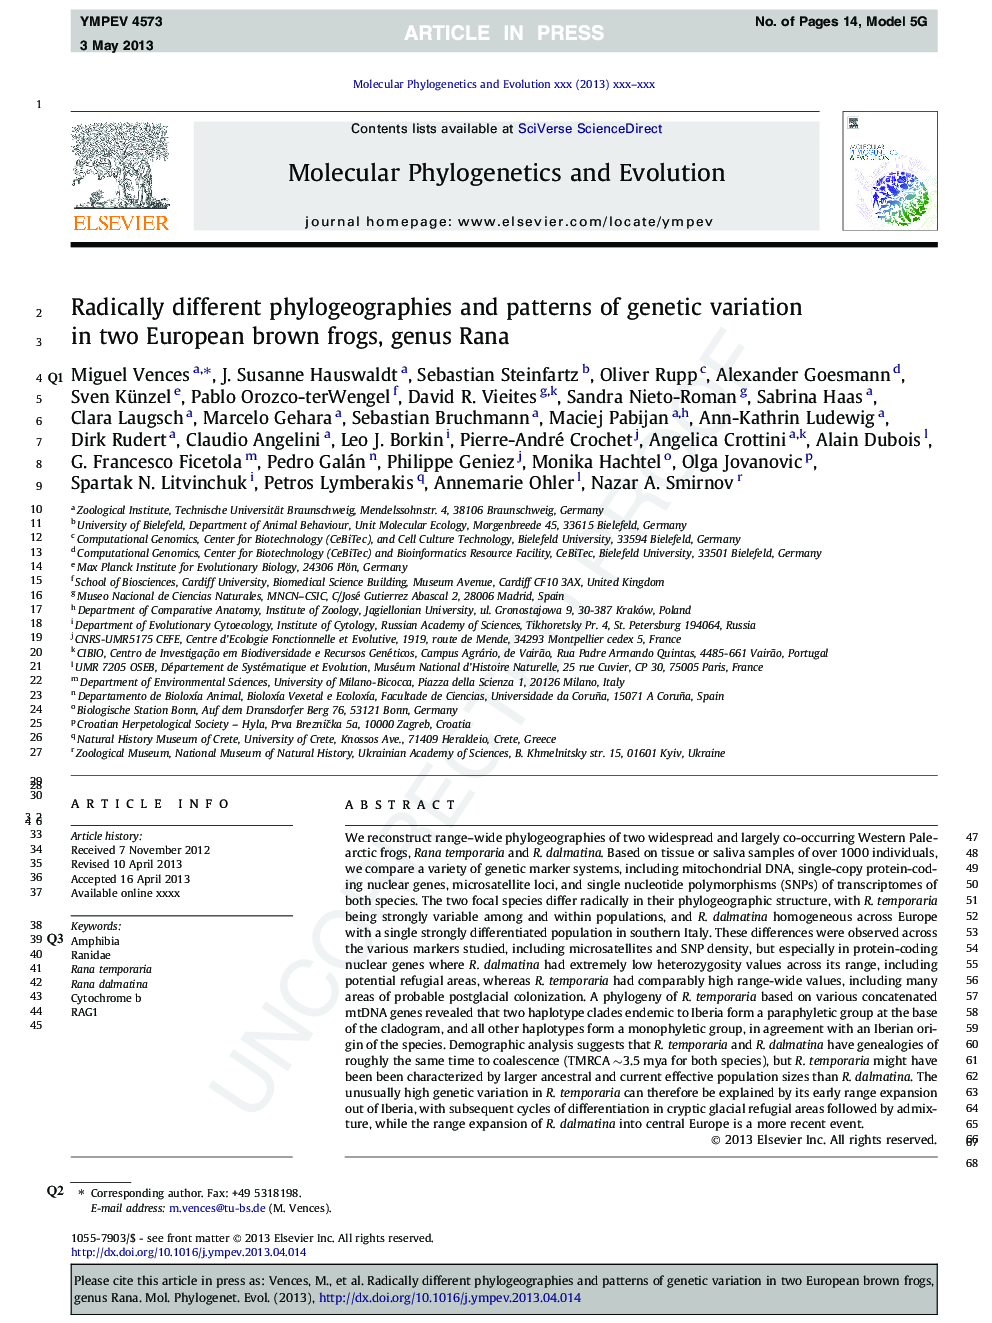 Radically different phylogeographies and patterns of genetic variation in two European brown frogs, genus Rana